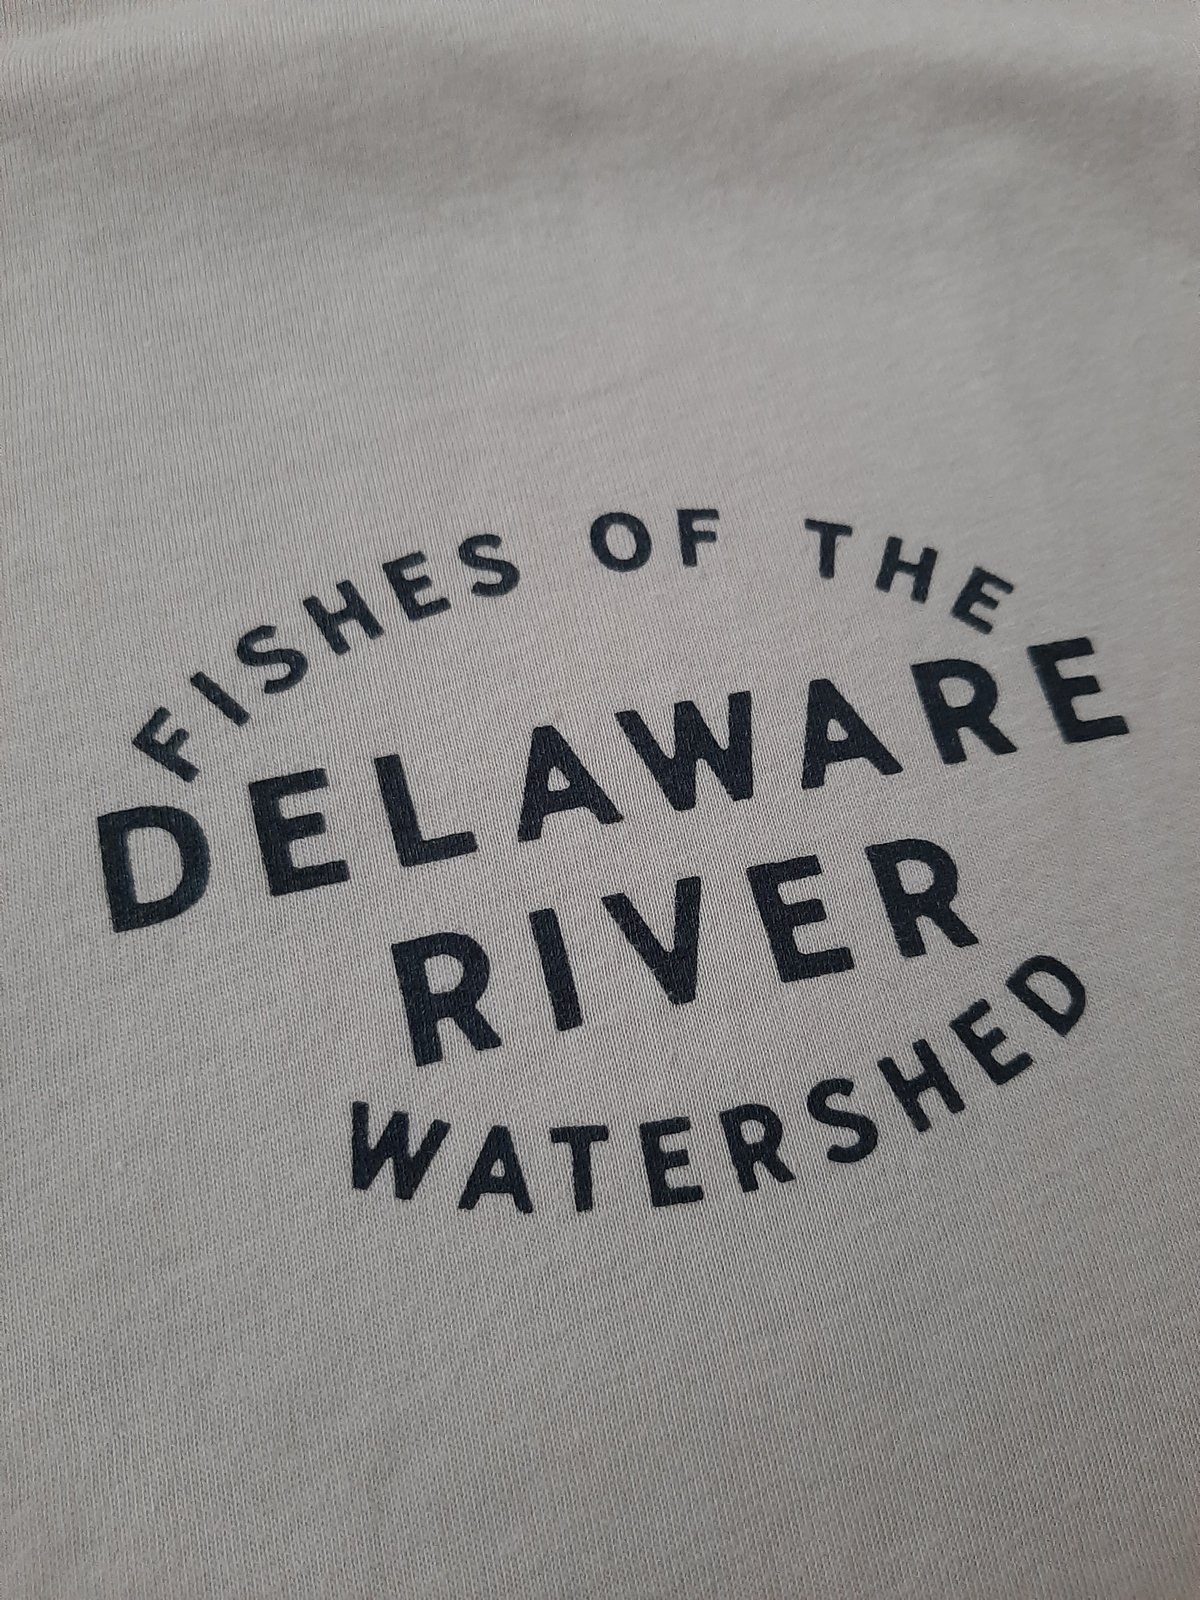 Image of Fishes of the Delaware t-shirt